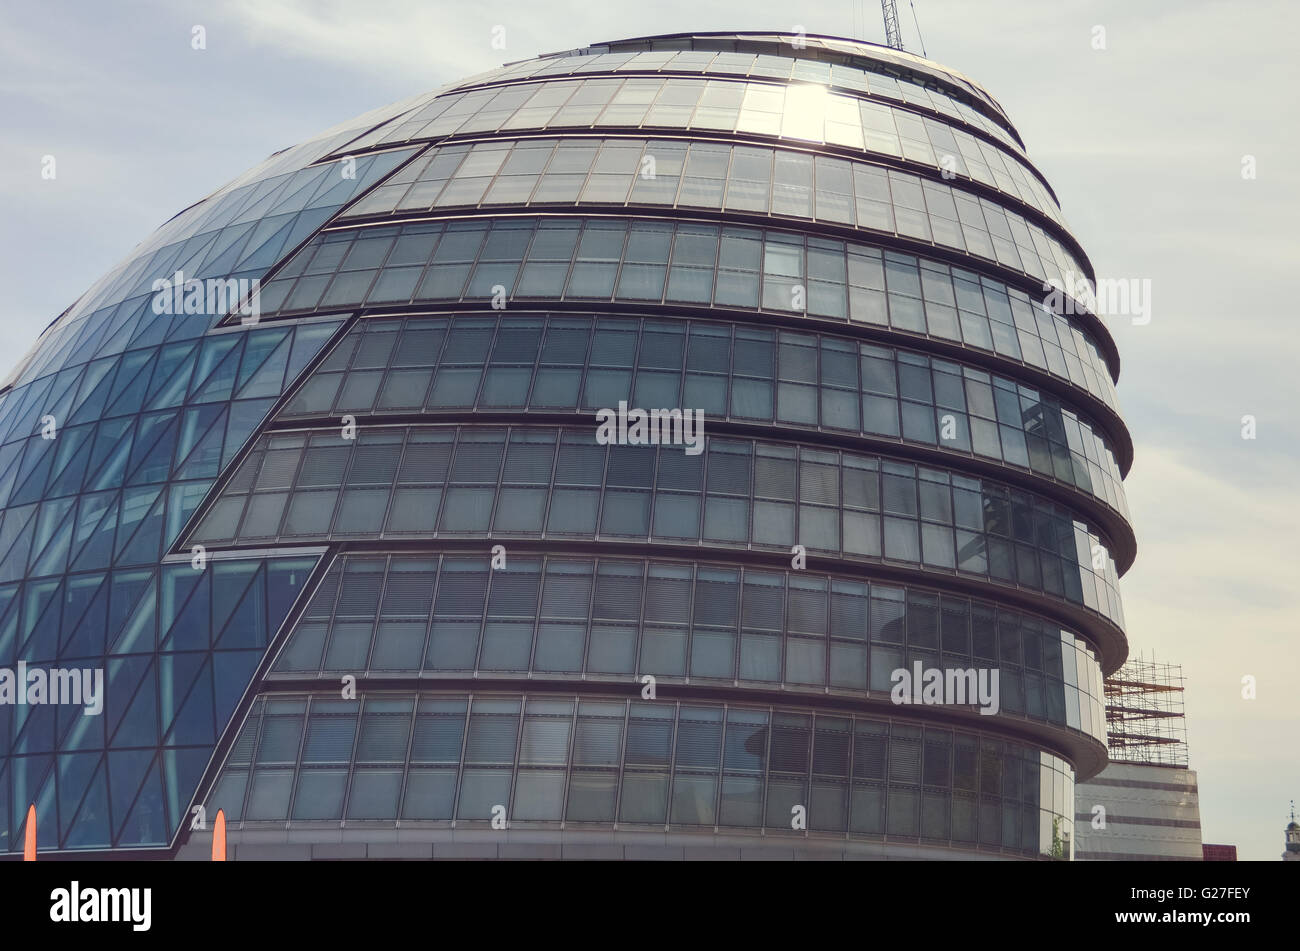 The City Hall has an unusual, bulbous shape, was designed by Norman Foster and opened in July 2002 Stock Photo